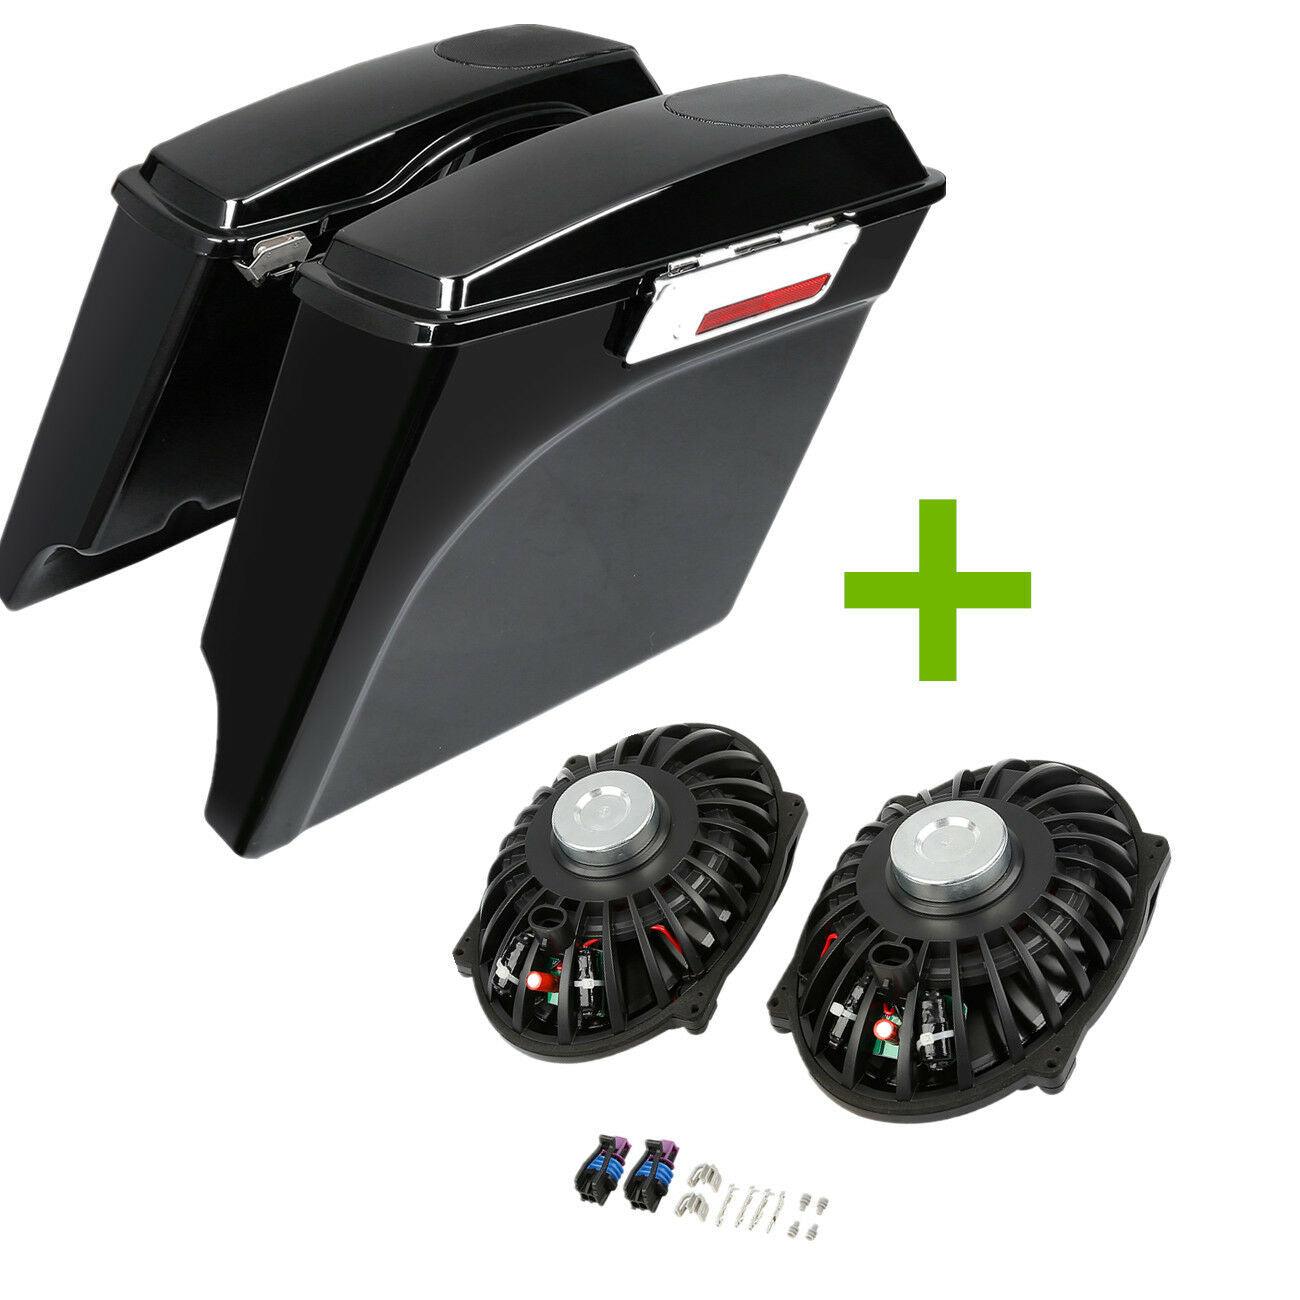 5" Stretched Saddle Bags Saddlebags & Speakers Fit For Harley Touring 1993-2013 - Moto Life Products